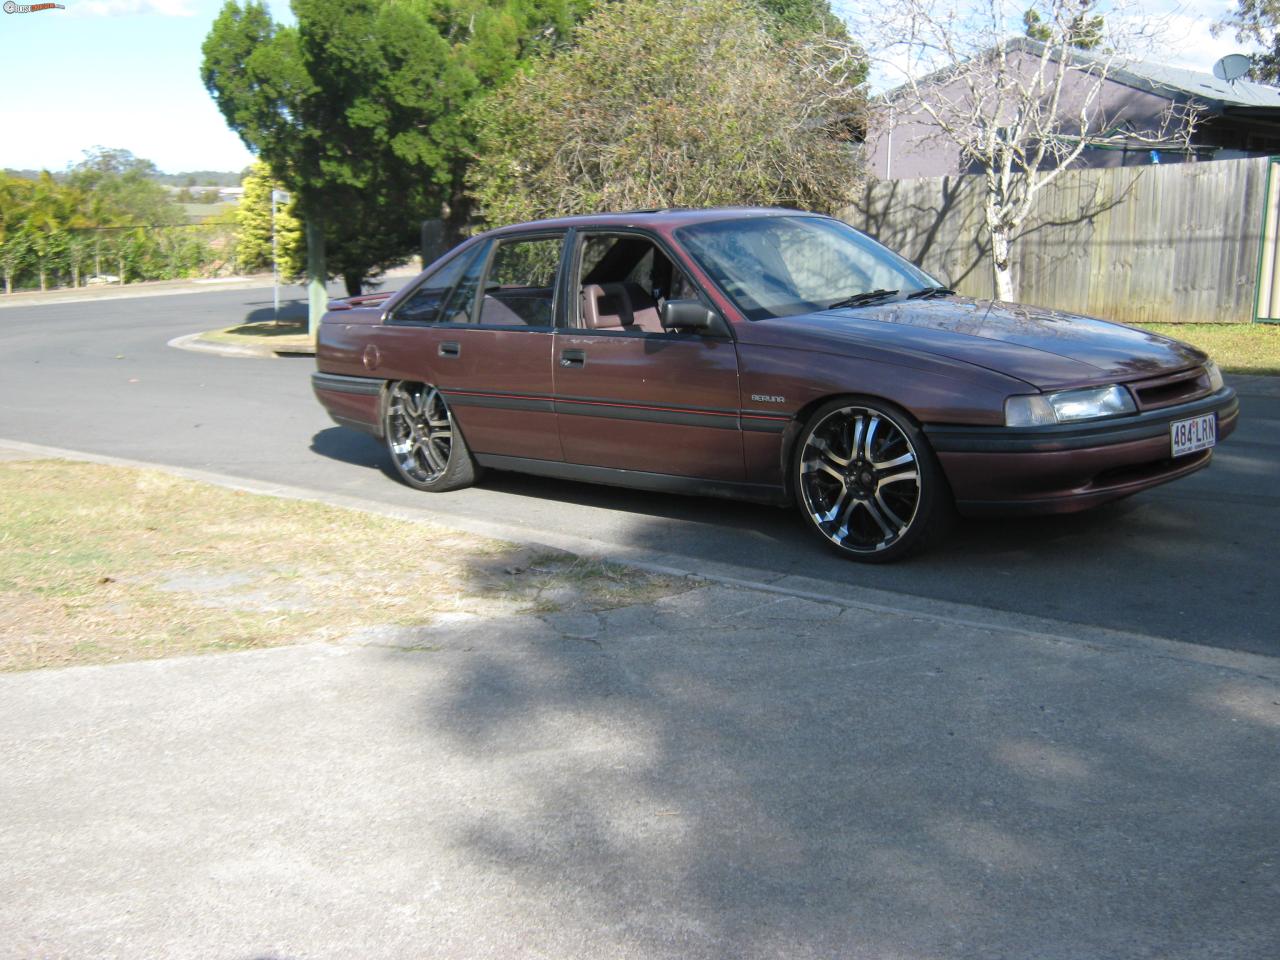 1989 Holden Commodore  Vn